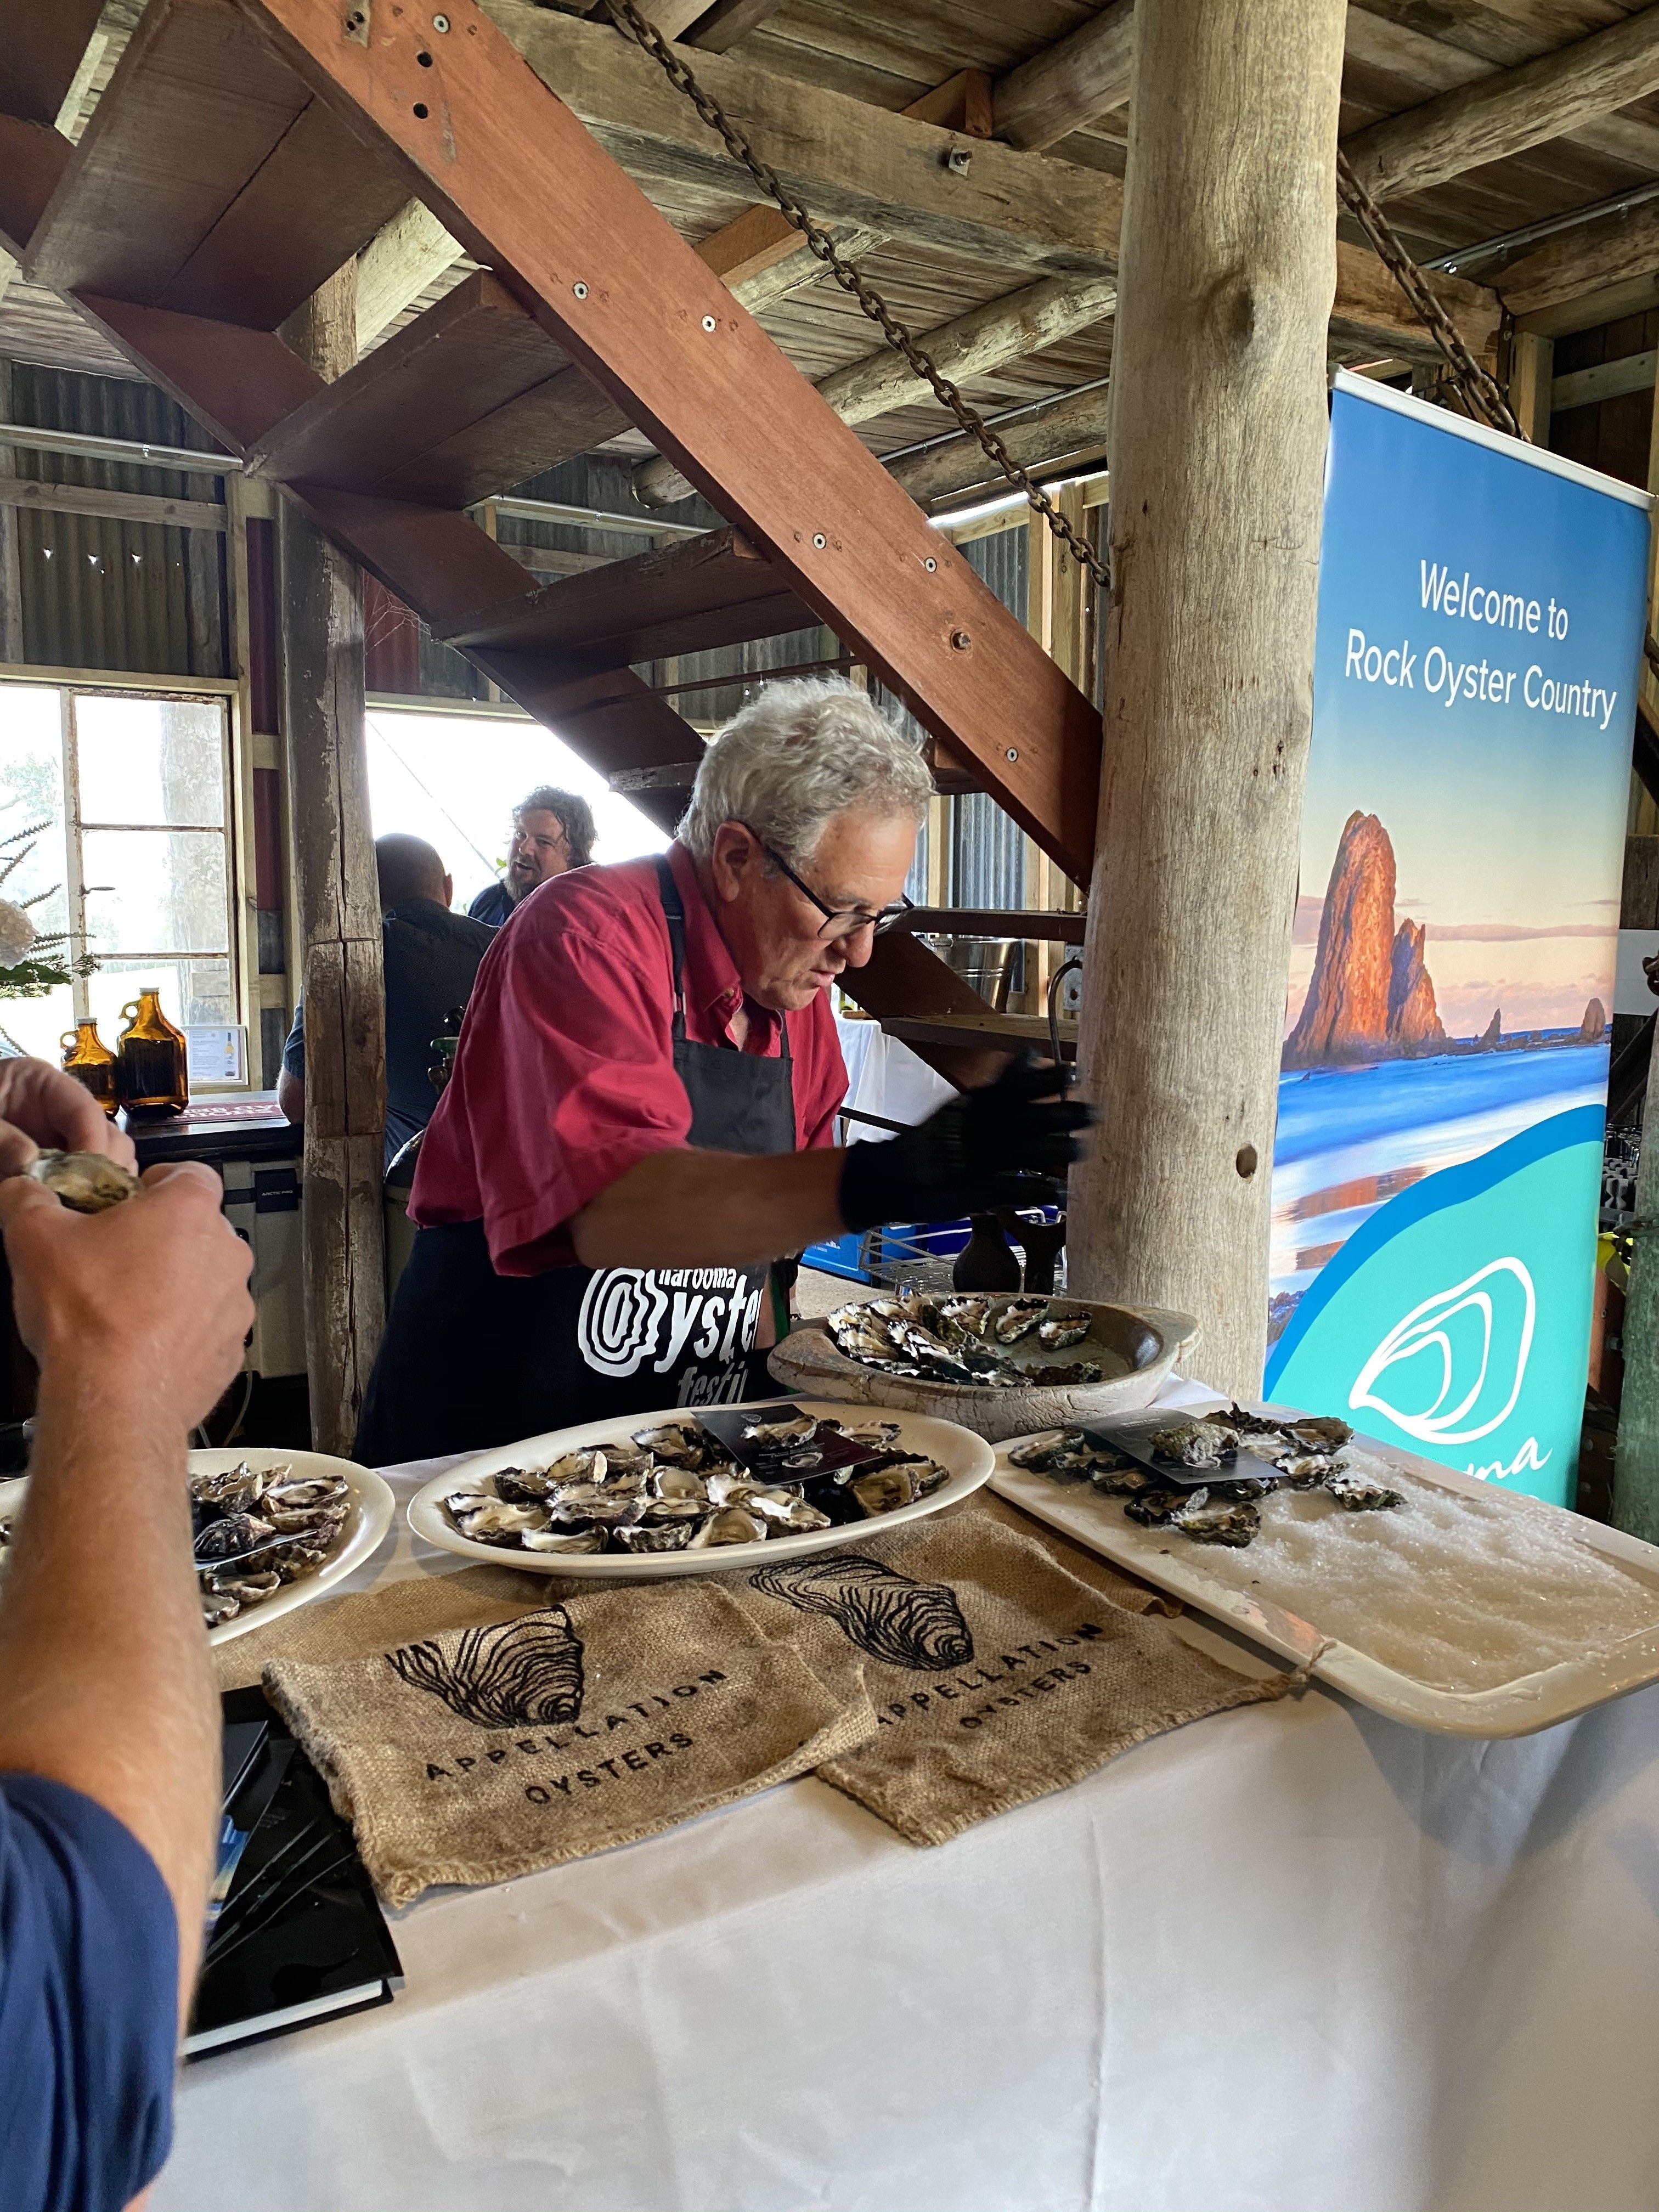 New Narooma plan to rock the oyster world